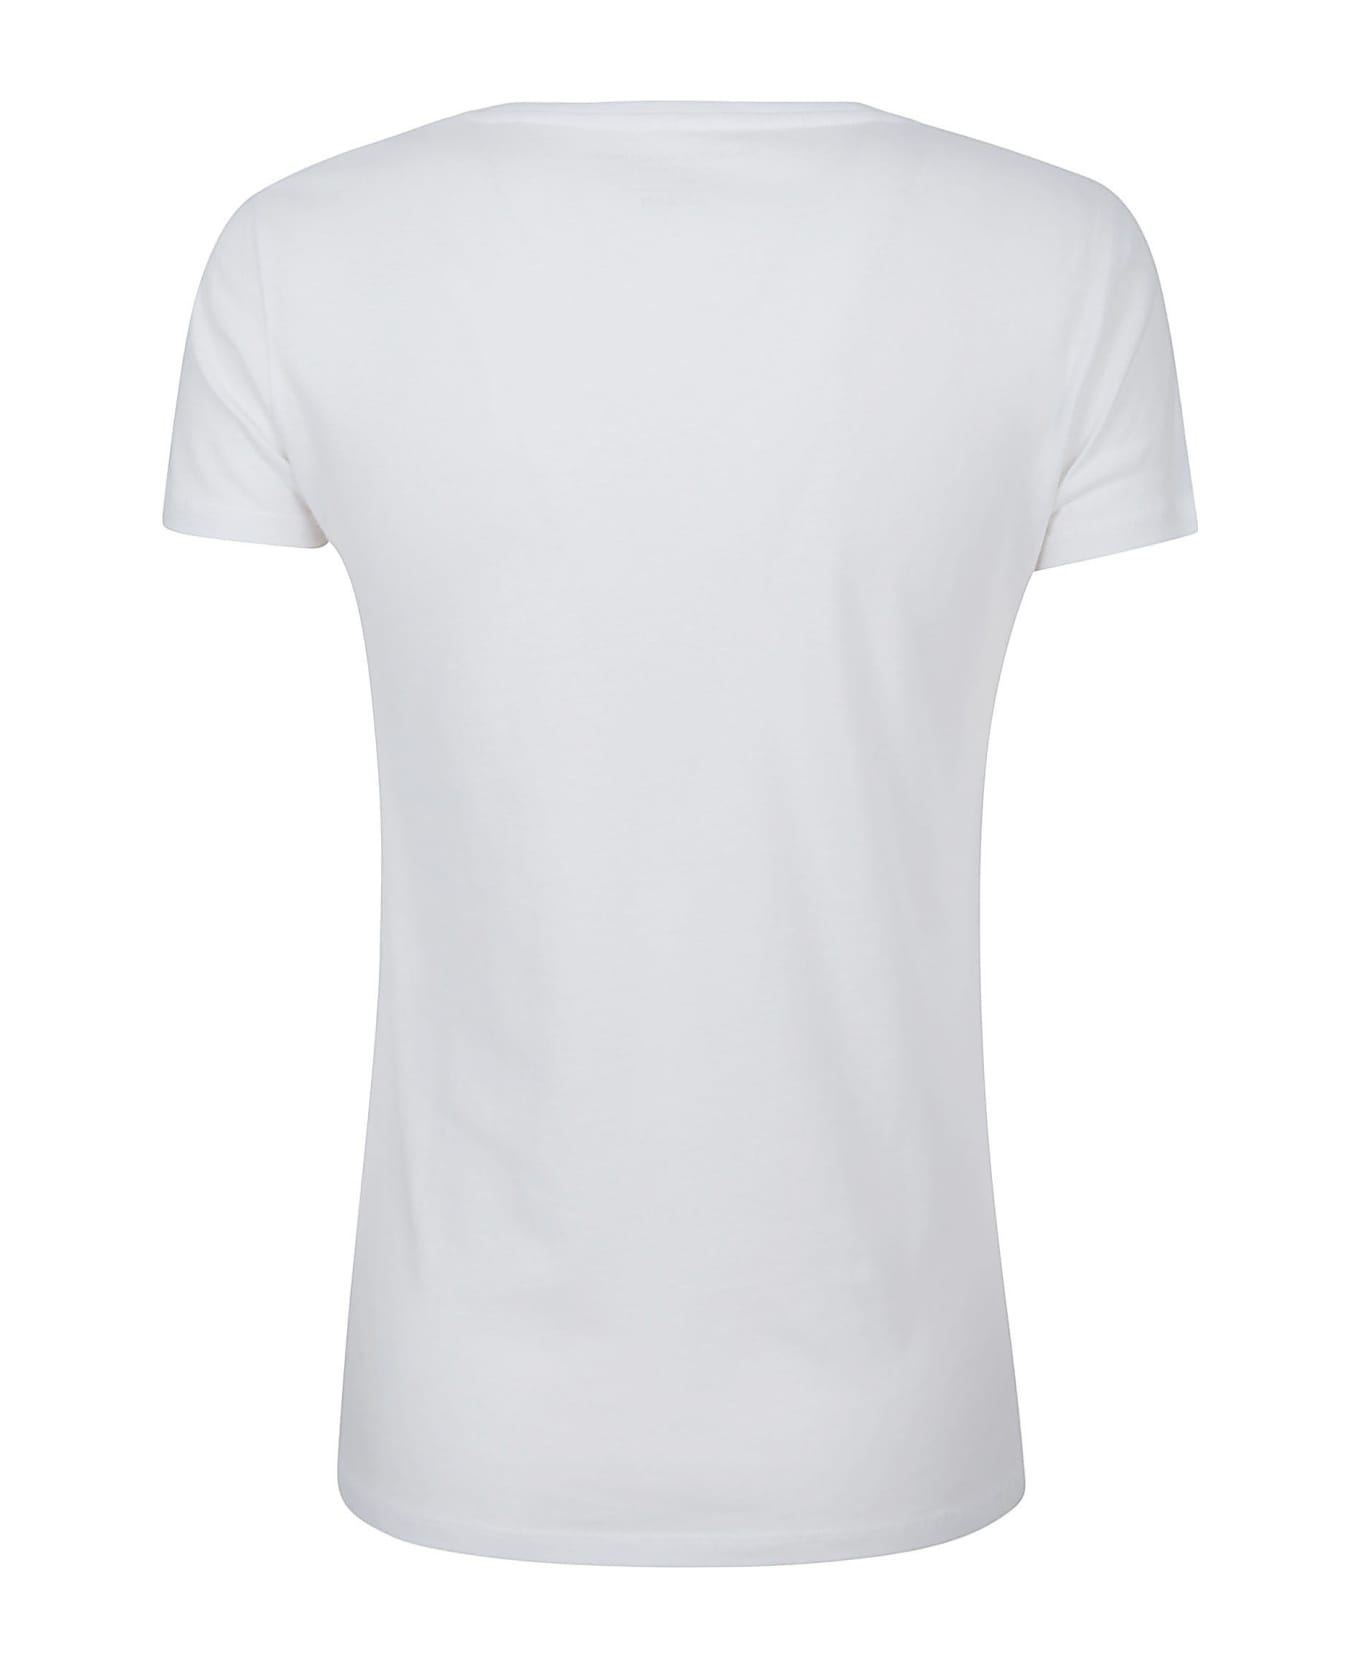 Majestic Filatures Majestic T-shirts And Polos White - White Tシャツ